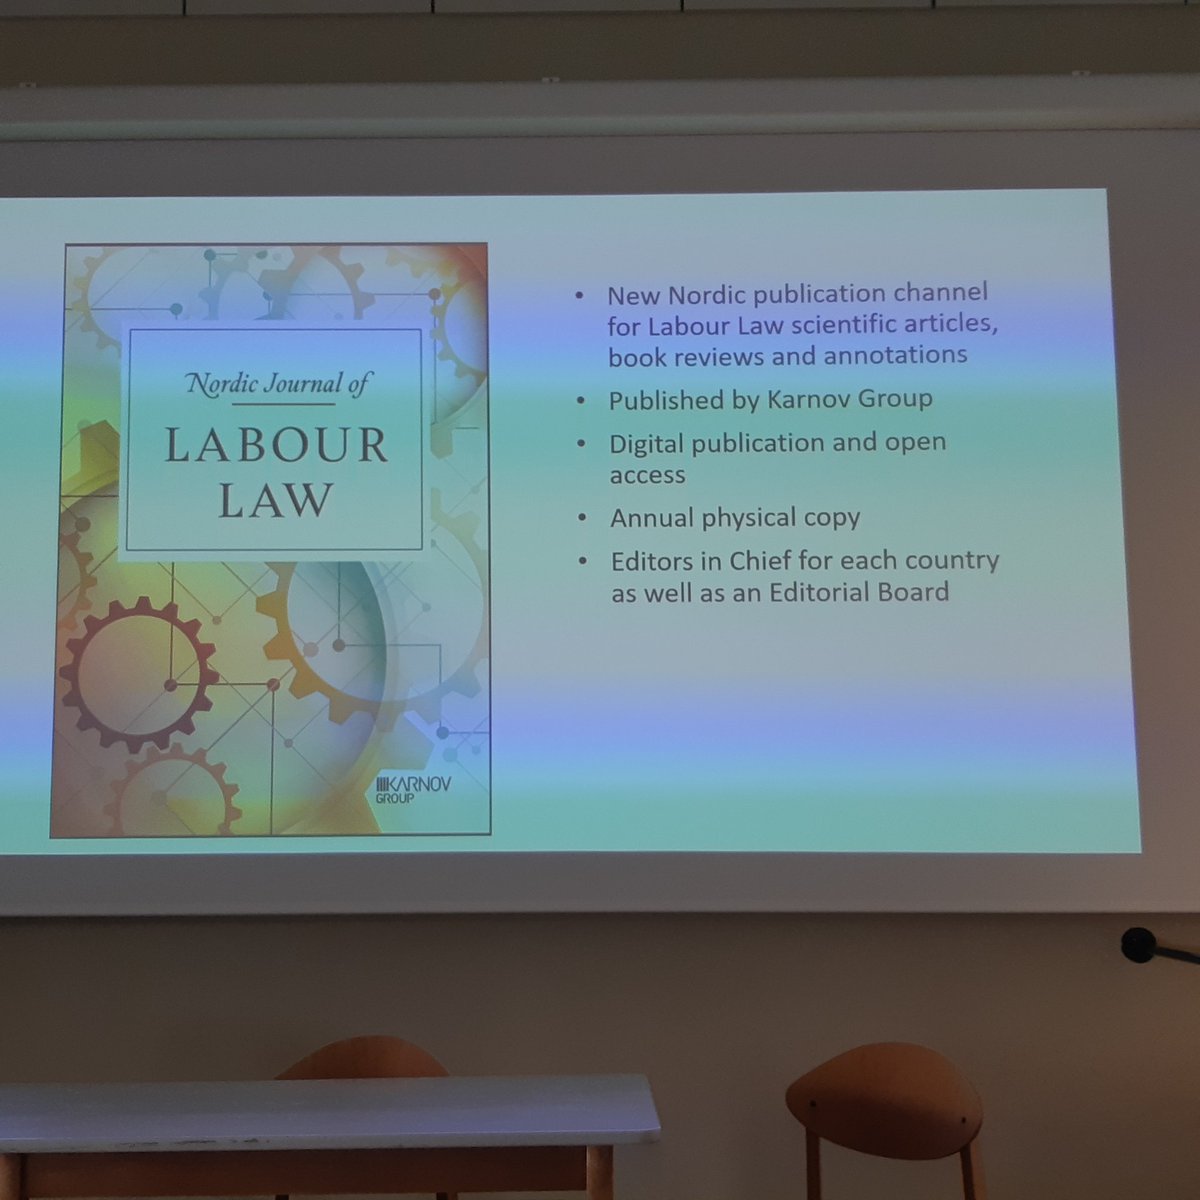 Perfect two days with nordic labour law colleagues @UEFLawSchool/ Helsinki. Good discussions, launching of the new Nordic Labour Law journal, and round table of senior scholars about their experiences in different international organs. 
What a joy to see people! #NNLLS https://t.co/Uy6GQ1vuLj